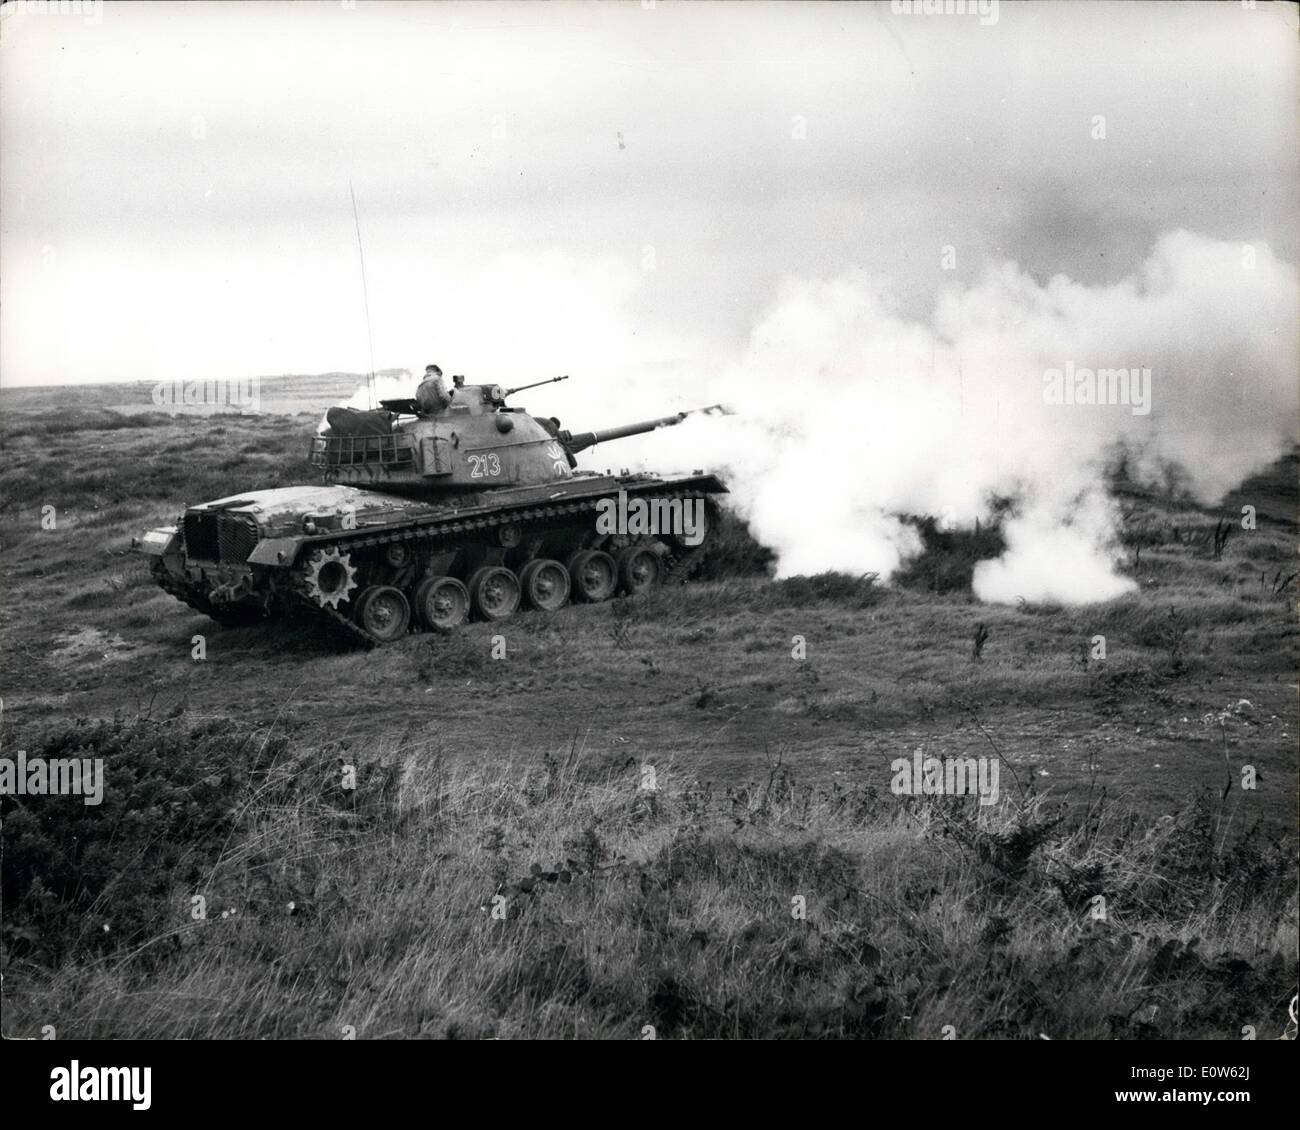 Sep. 09, 1961 - German Panzer Troops In Practice At Castlemartin: The German Panzer troops currently training at Castlemartin, Wales, held a firing practice there earlier this week. Photo shows One of the German tanks firing during the exercise. Stock Photo